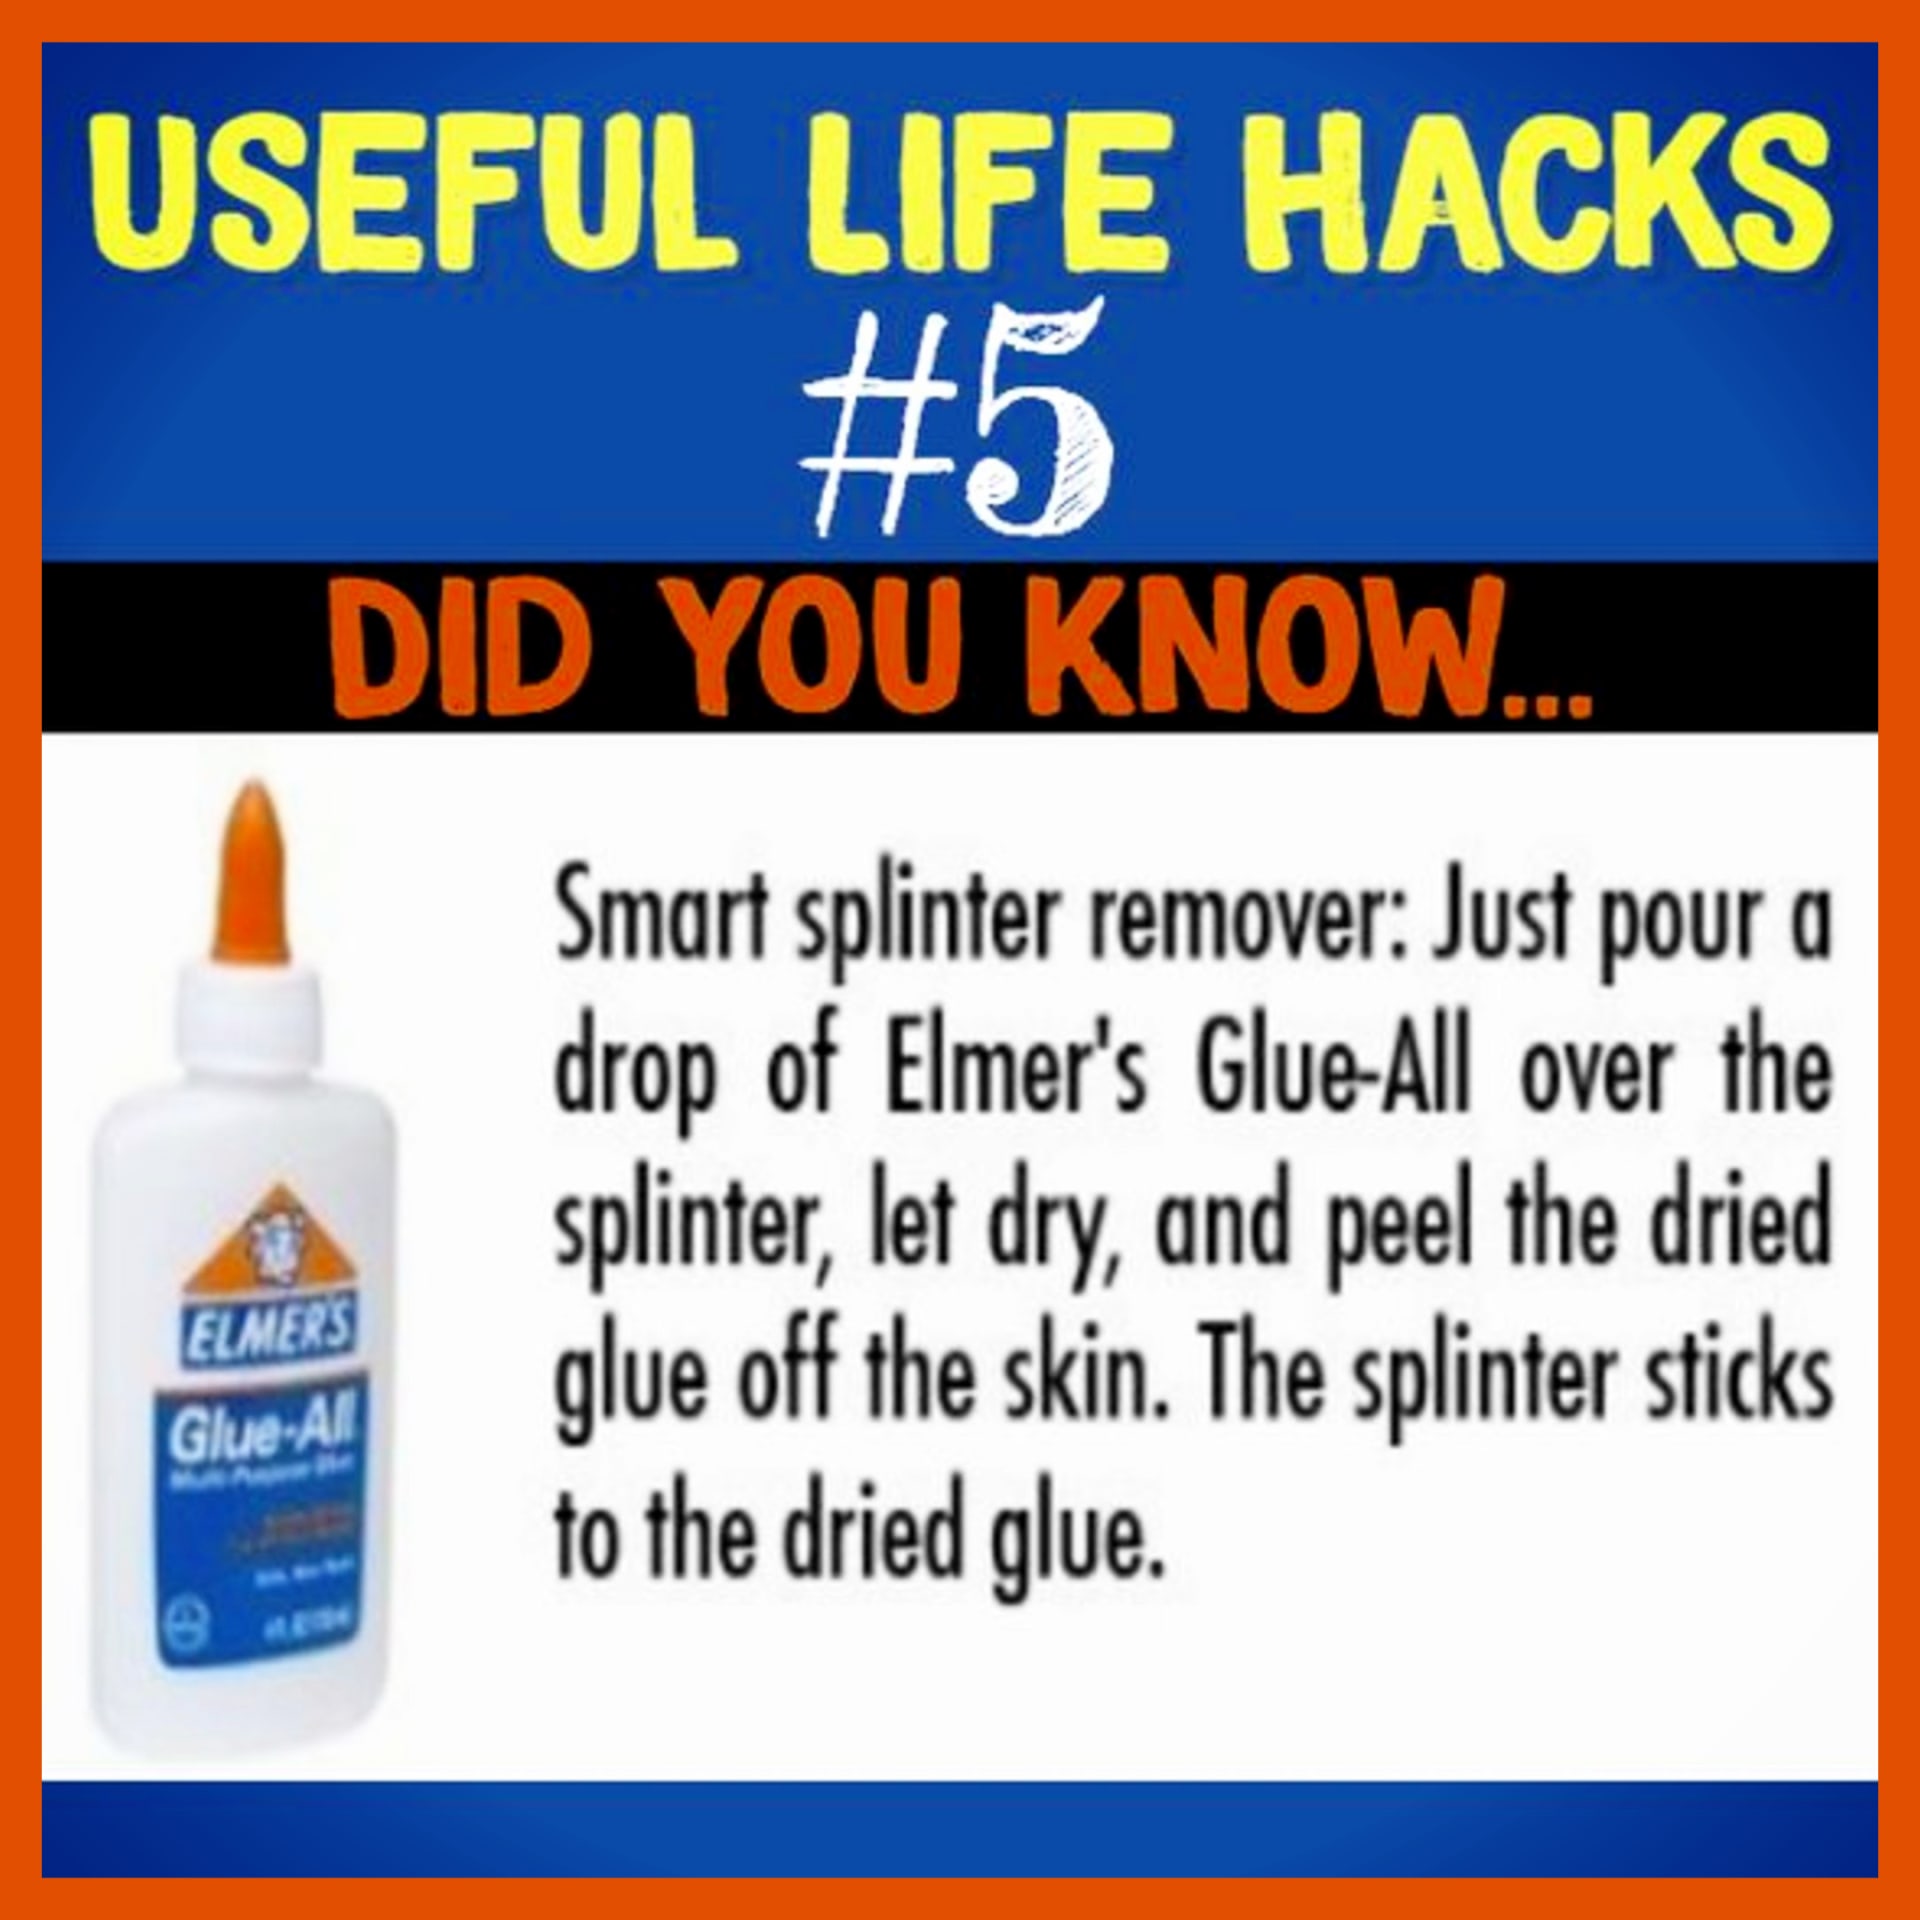 splinter removal hacks and more Useful Life Hacks - MIND BLOWN!  Households life hacks and good to know hacks tips and lifehacks - these household hacks, cleaning tips & tricks are such helpful hints and life changing lifehacks every girl should know.  How to remove splinters - splinter removal for kids